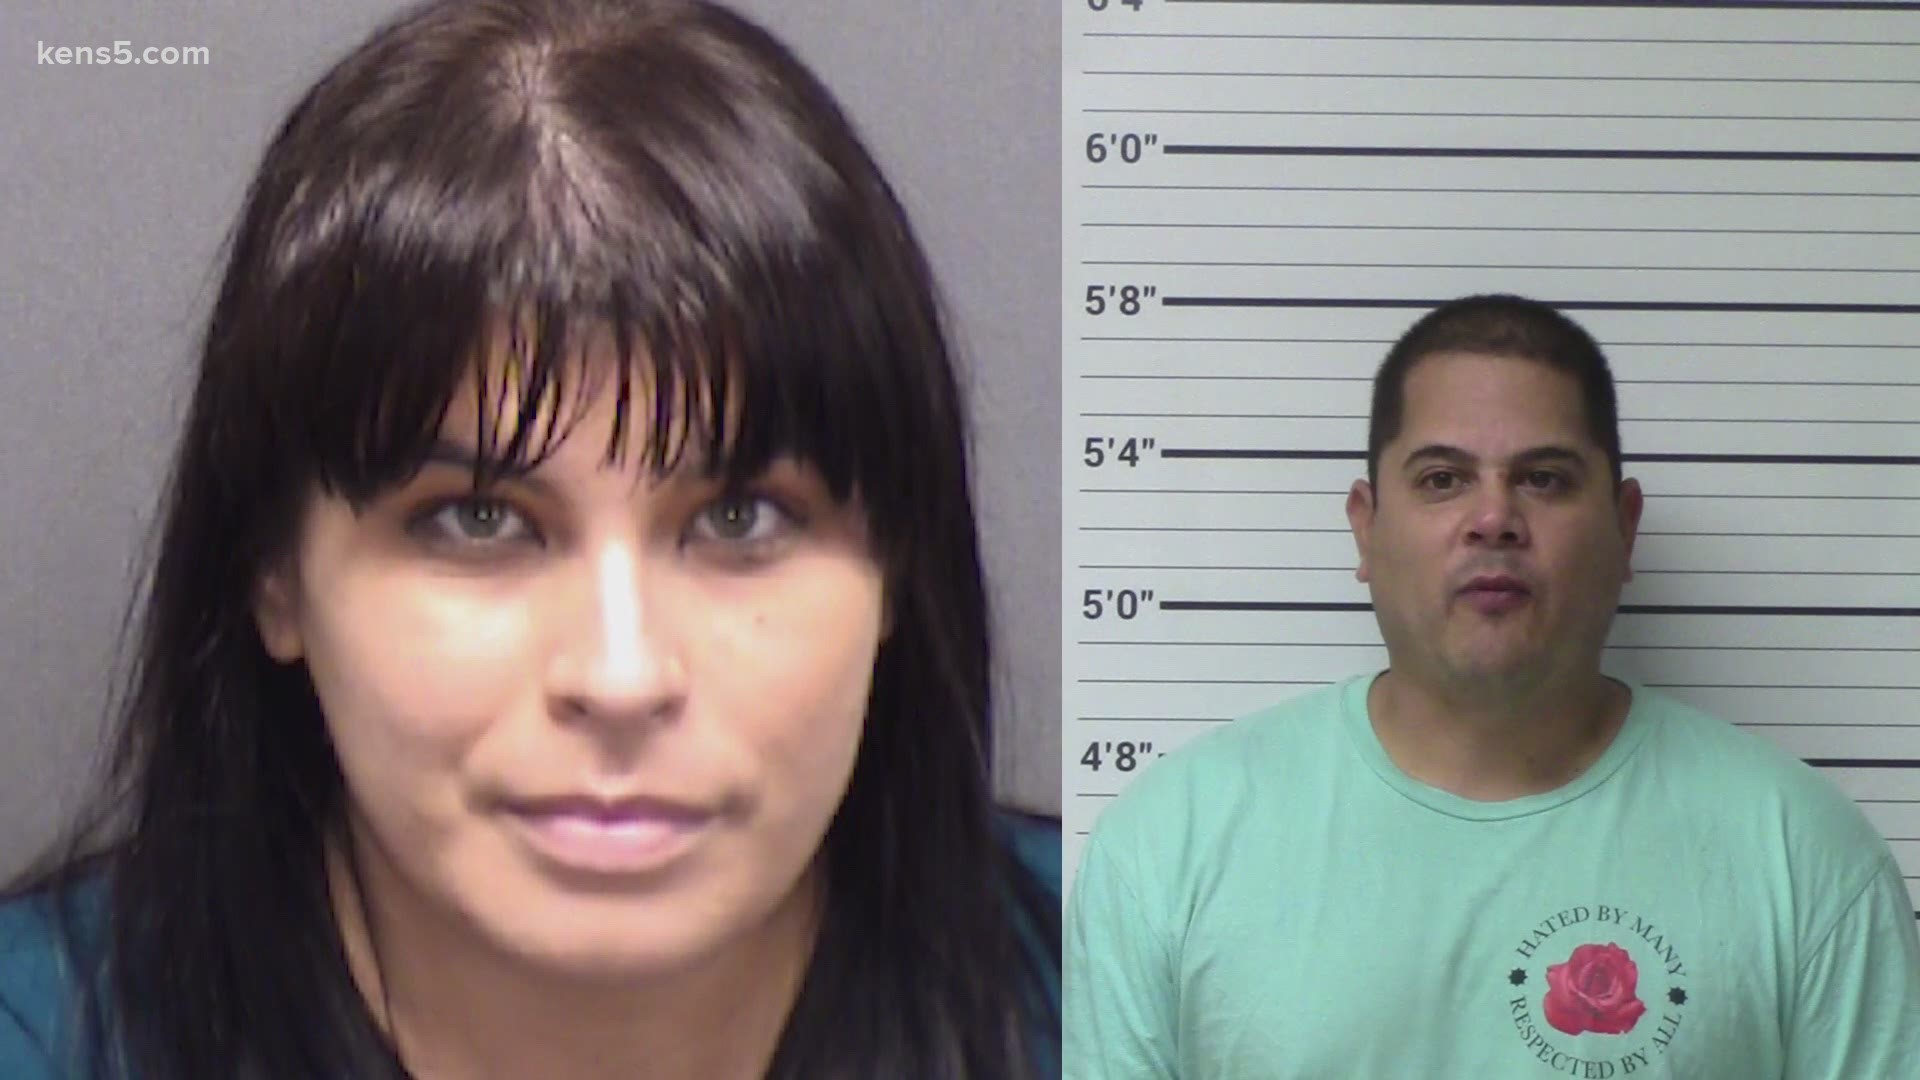 Gideon Barideaux's mother Jennifer and her boyfriend Raymond Garces Jr. were arrested and charged with tampering with physical evidence.